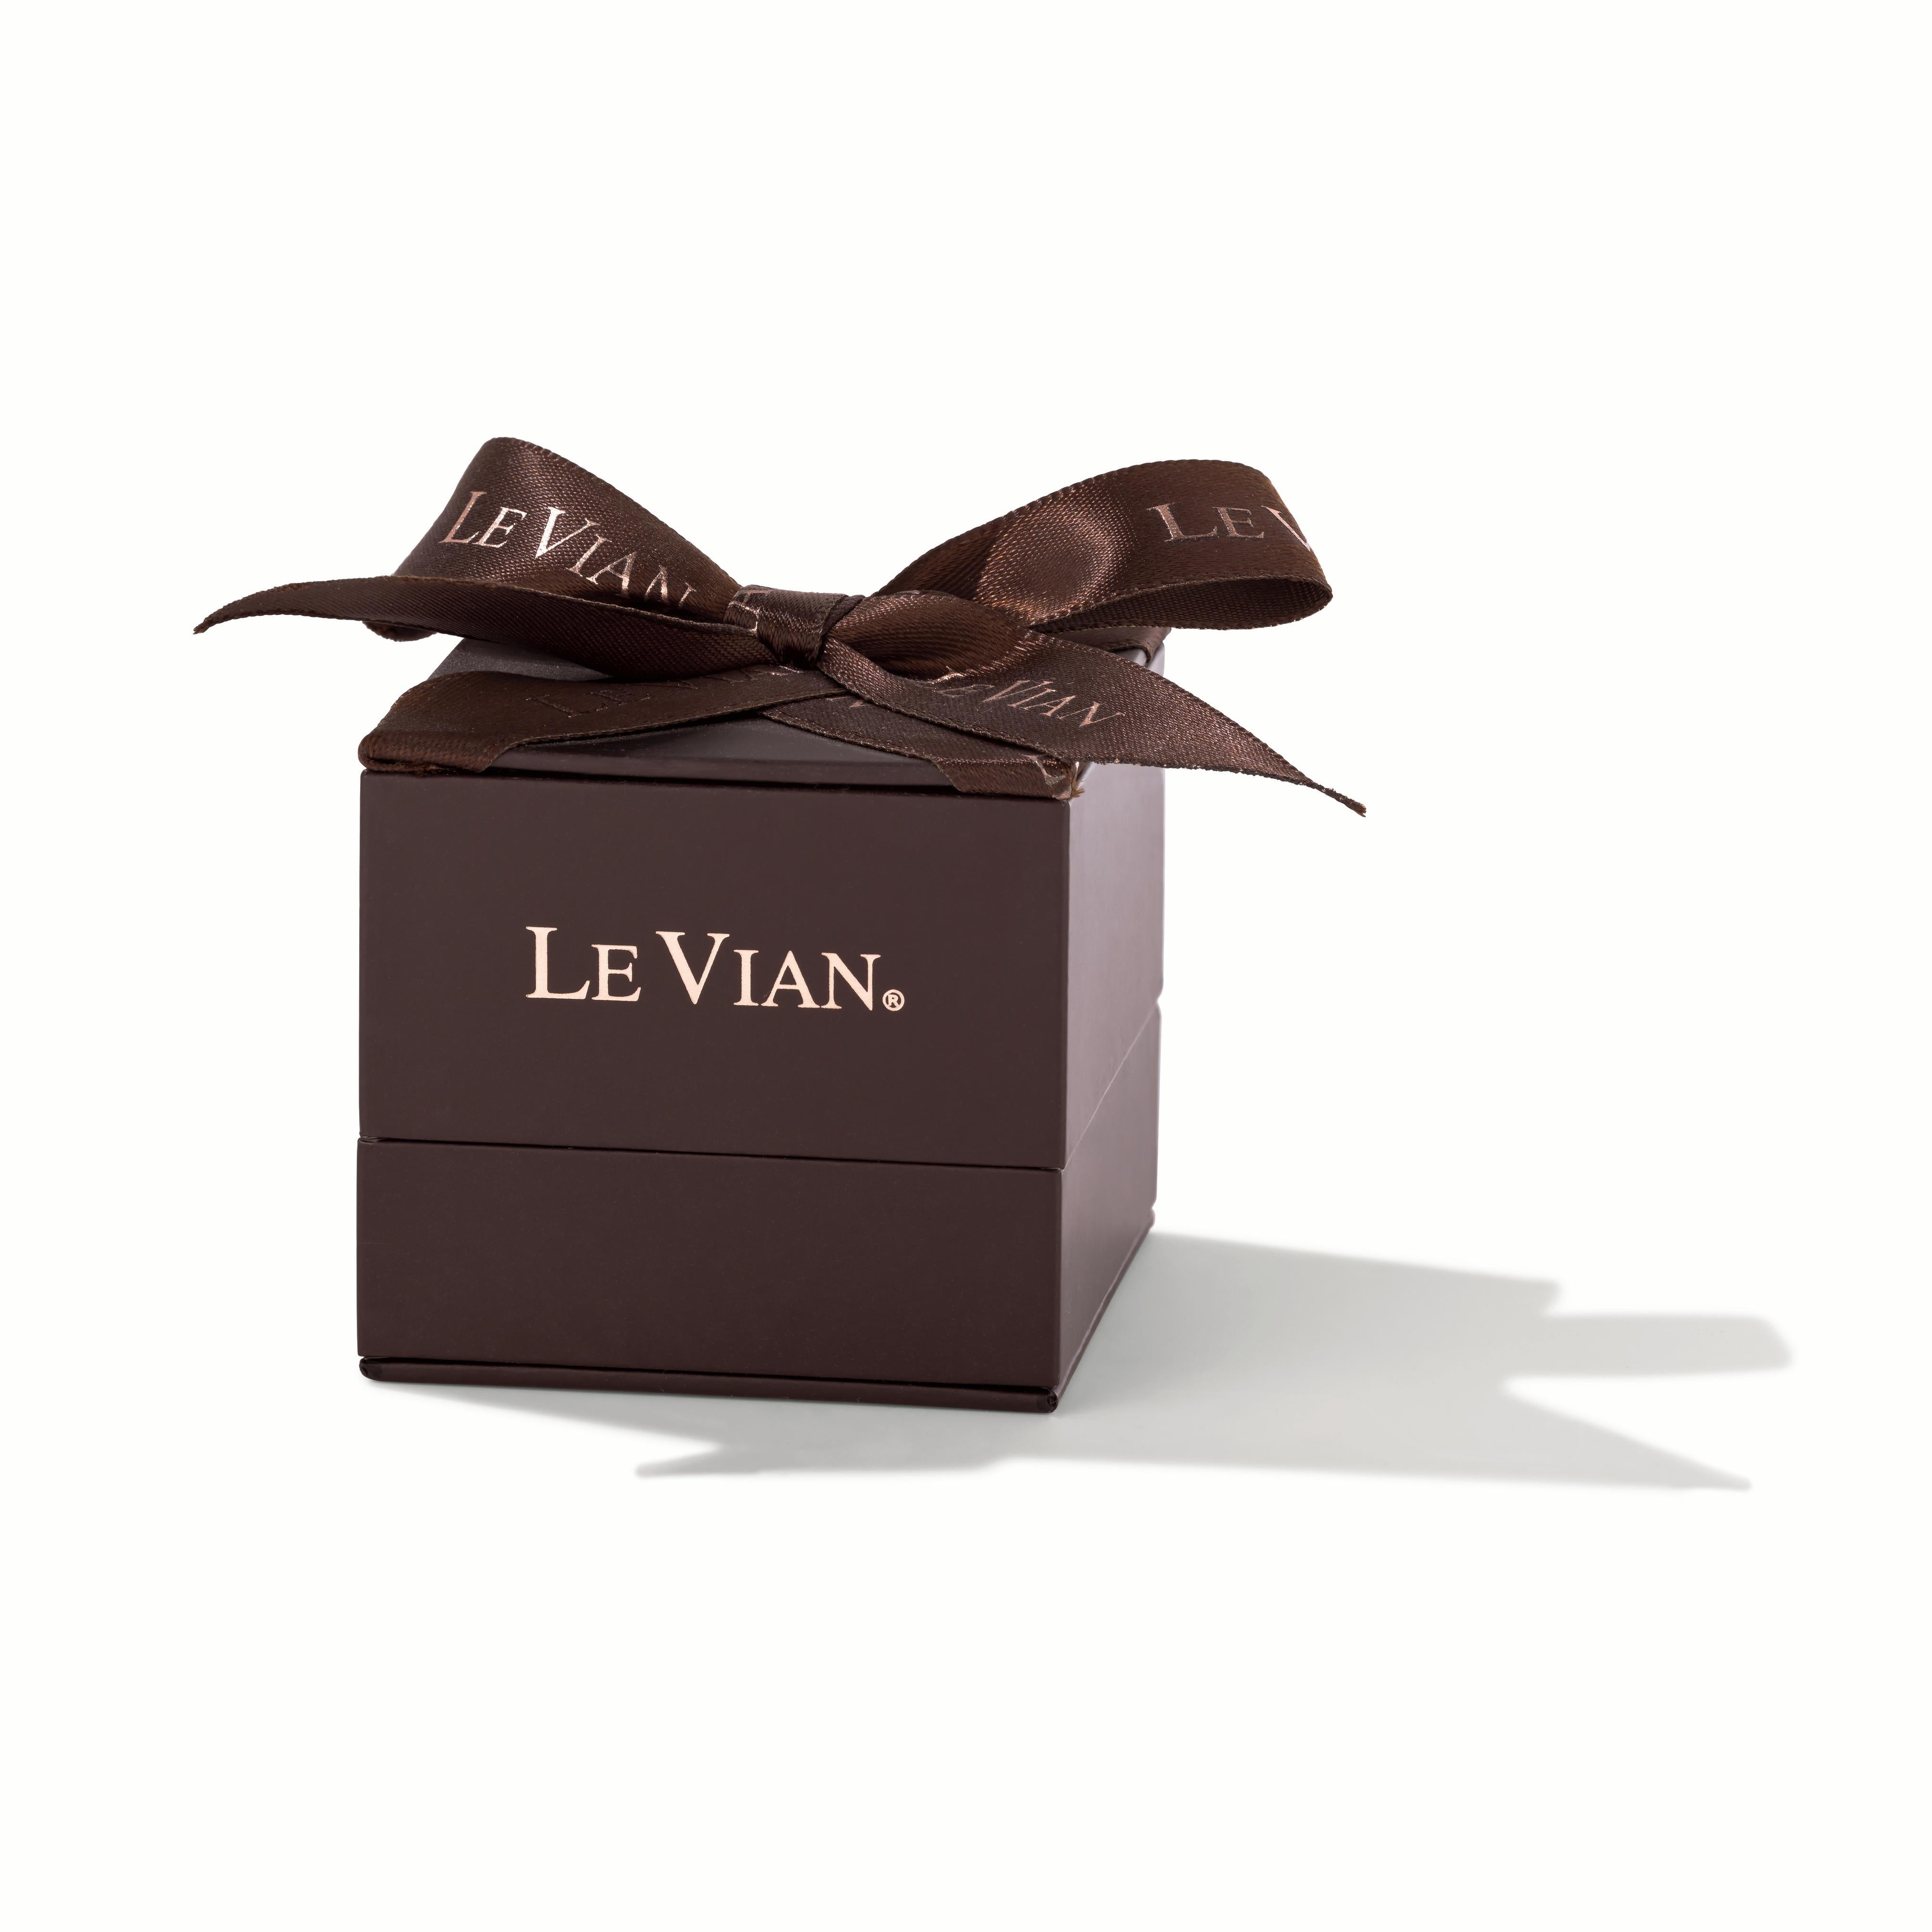 Le Vian Exotics® Earrings featuring 1/4 cts. Blue Diamonds, 1/6 cts. Red Diamonds, 3/8 cts. - Diamonds, 1/10 cts. Vanilla Diamonds® set in 14K Vanilla Gold®

Ring may or may not be sizable, please feel free to reach out with any questions!

Item